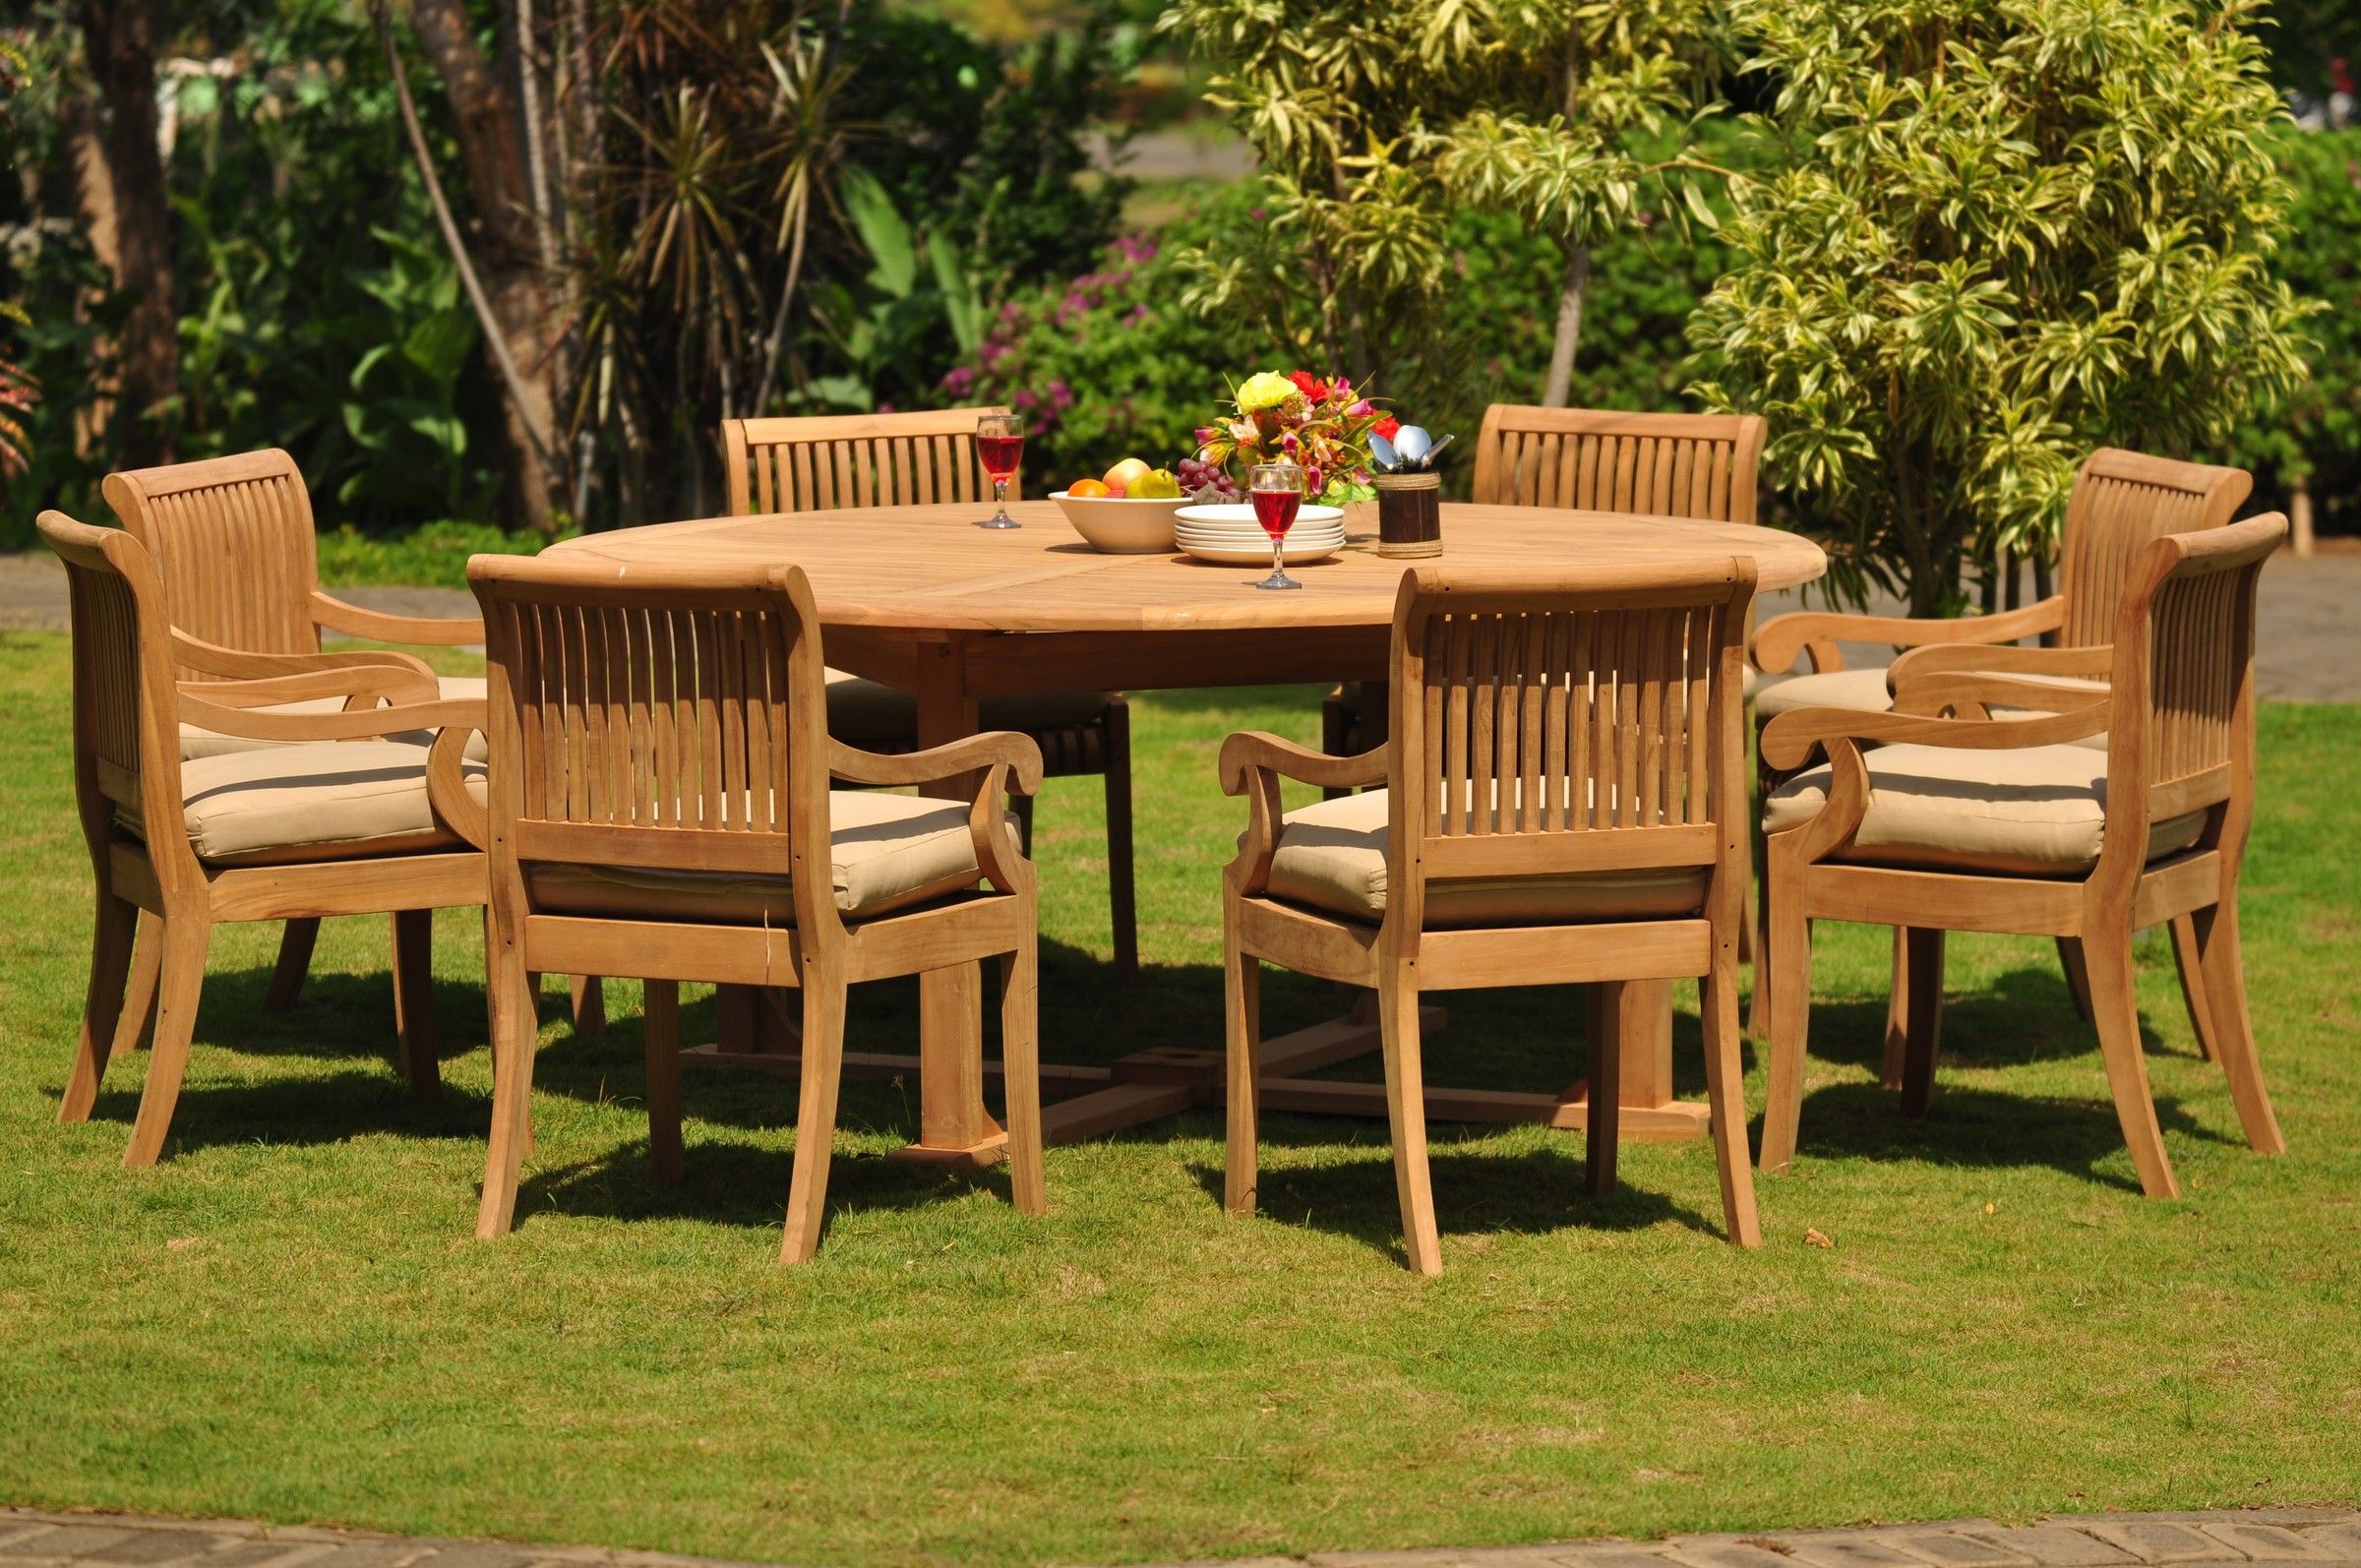 Teak Dining Set: 8 Seater 9 Pc: 72" Round Table And 8 Giva Arm Chairs Pertaining To Teak Folding Chair Patio Dining Sets (View 3 of 15)